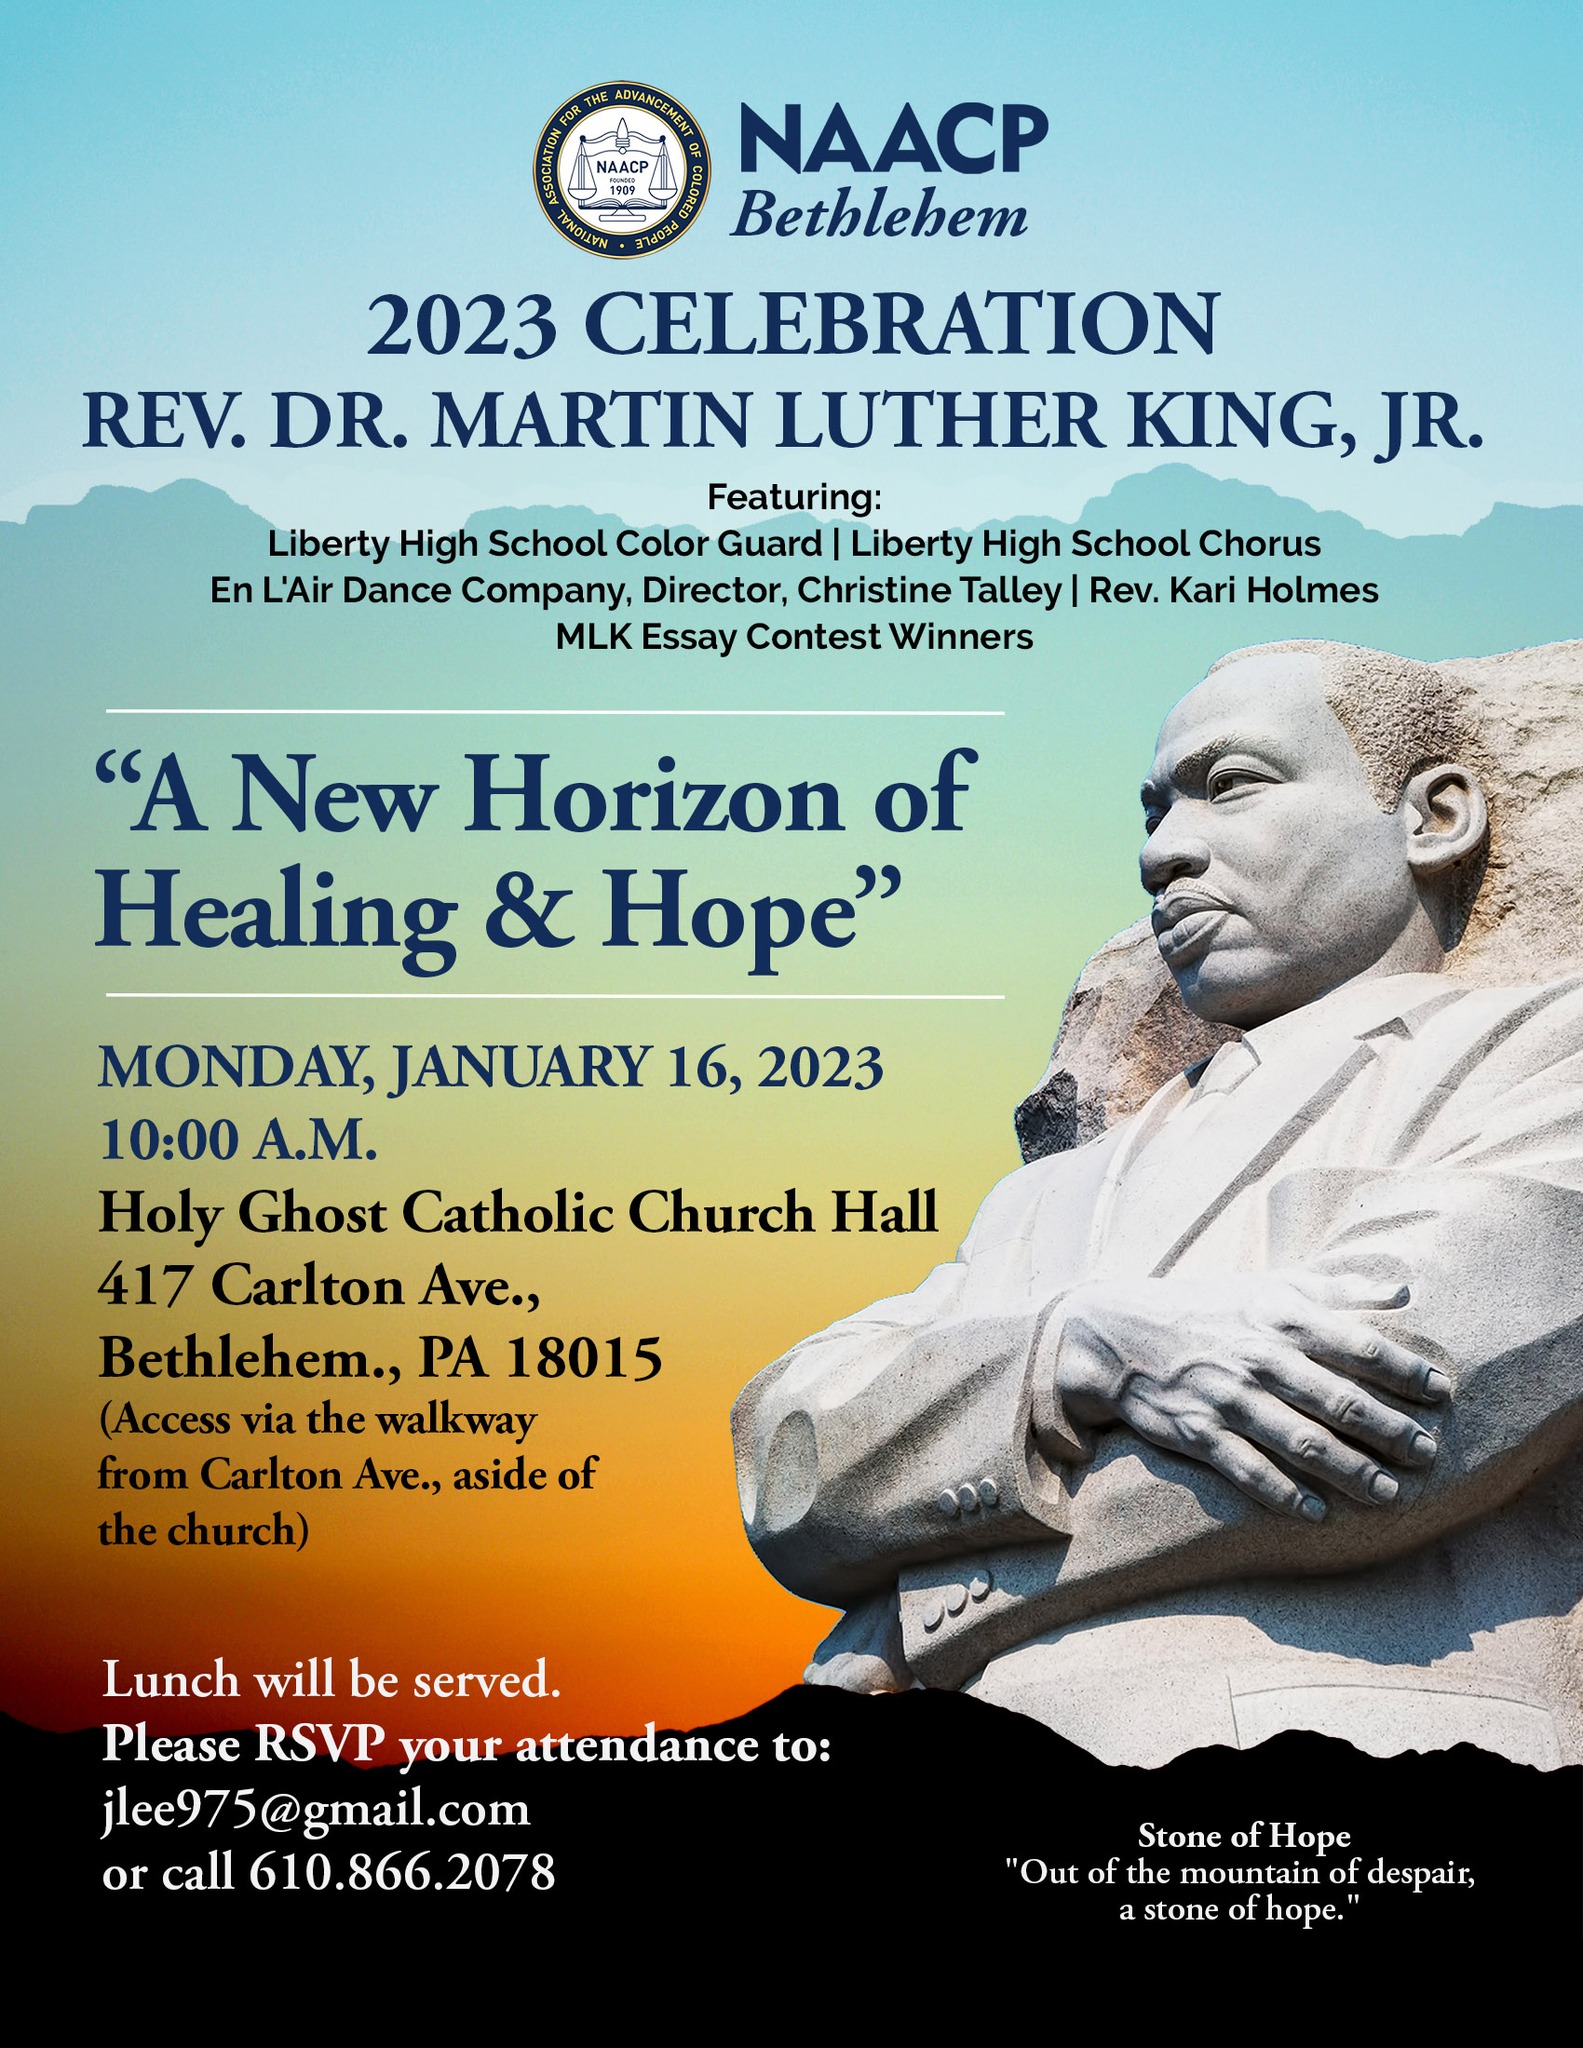 Post with Martin Luthar King Jr sculpture carved out of rock on right. Title of celebration "A New Horizon of Healing & Hope" and event date, time, and location details.